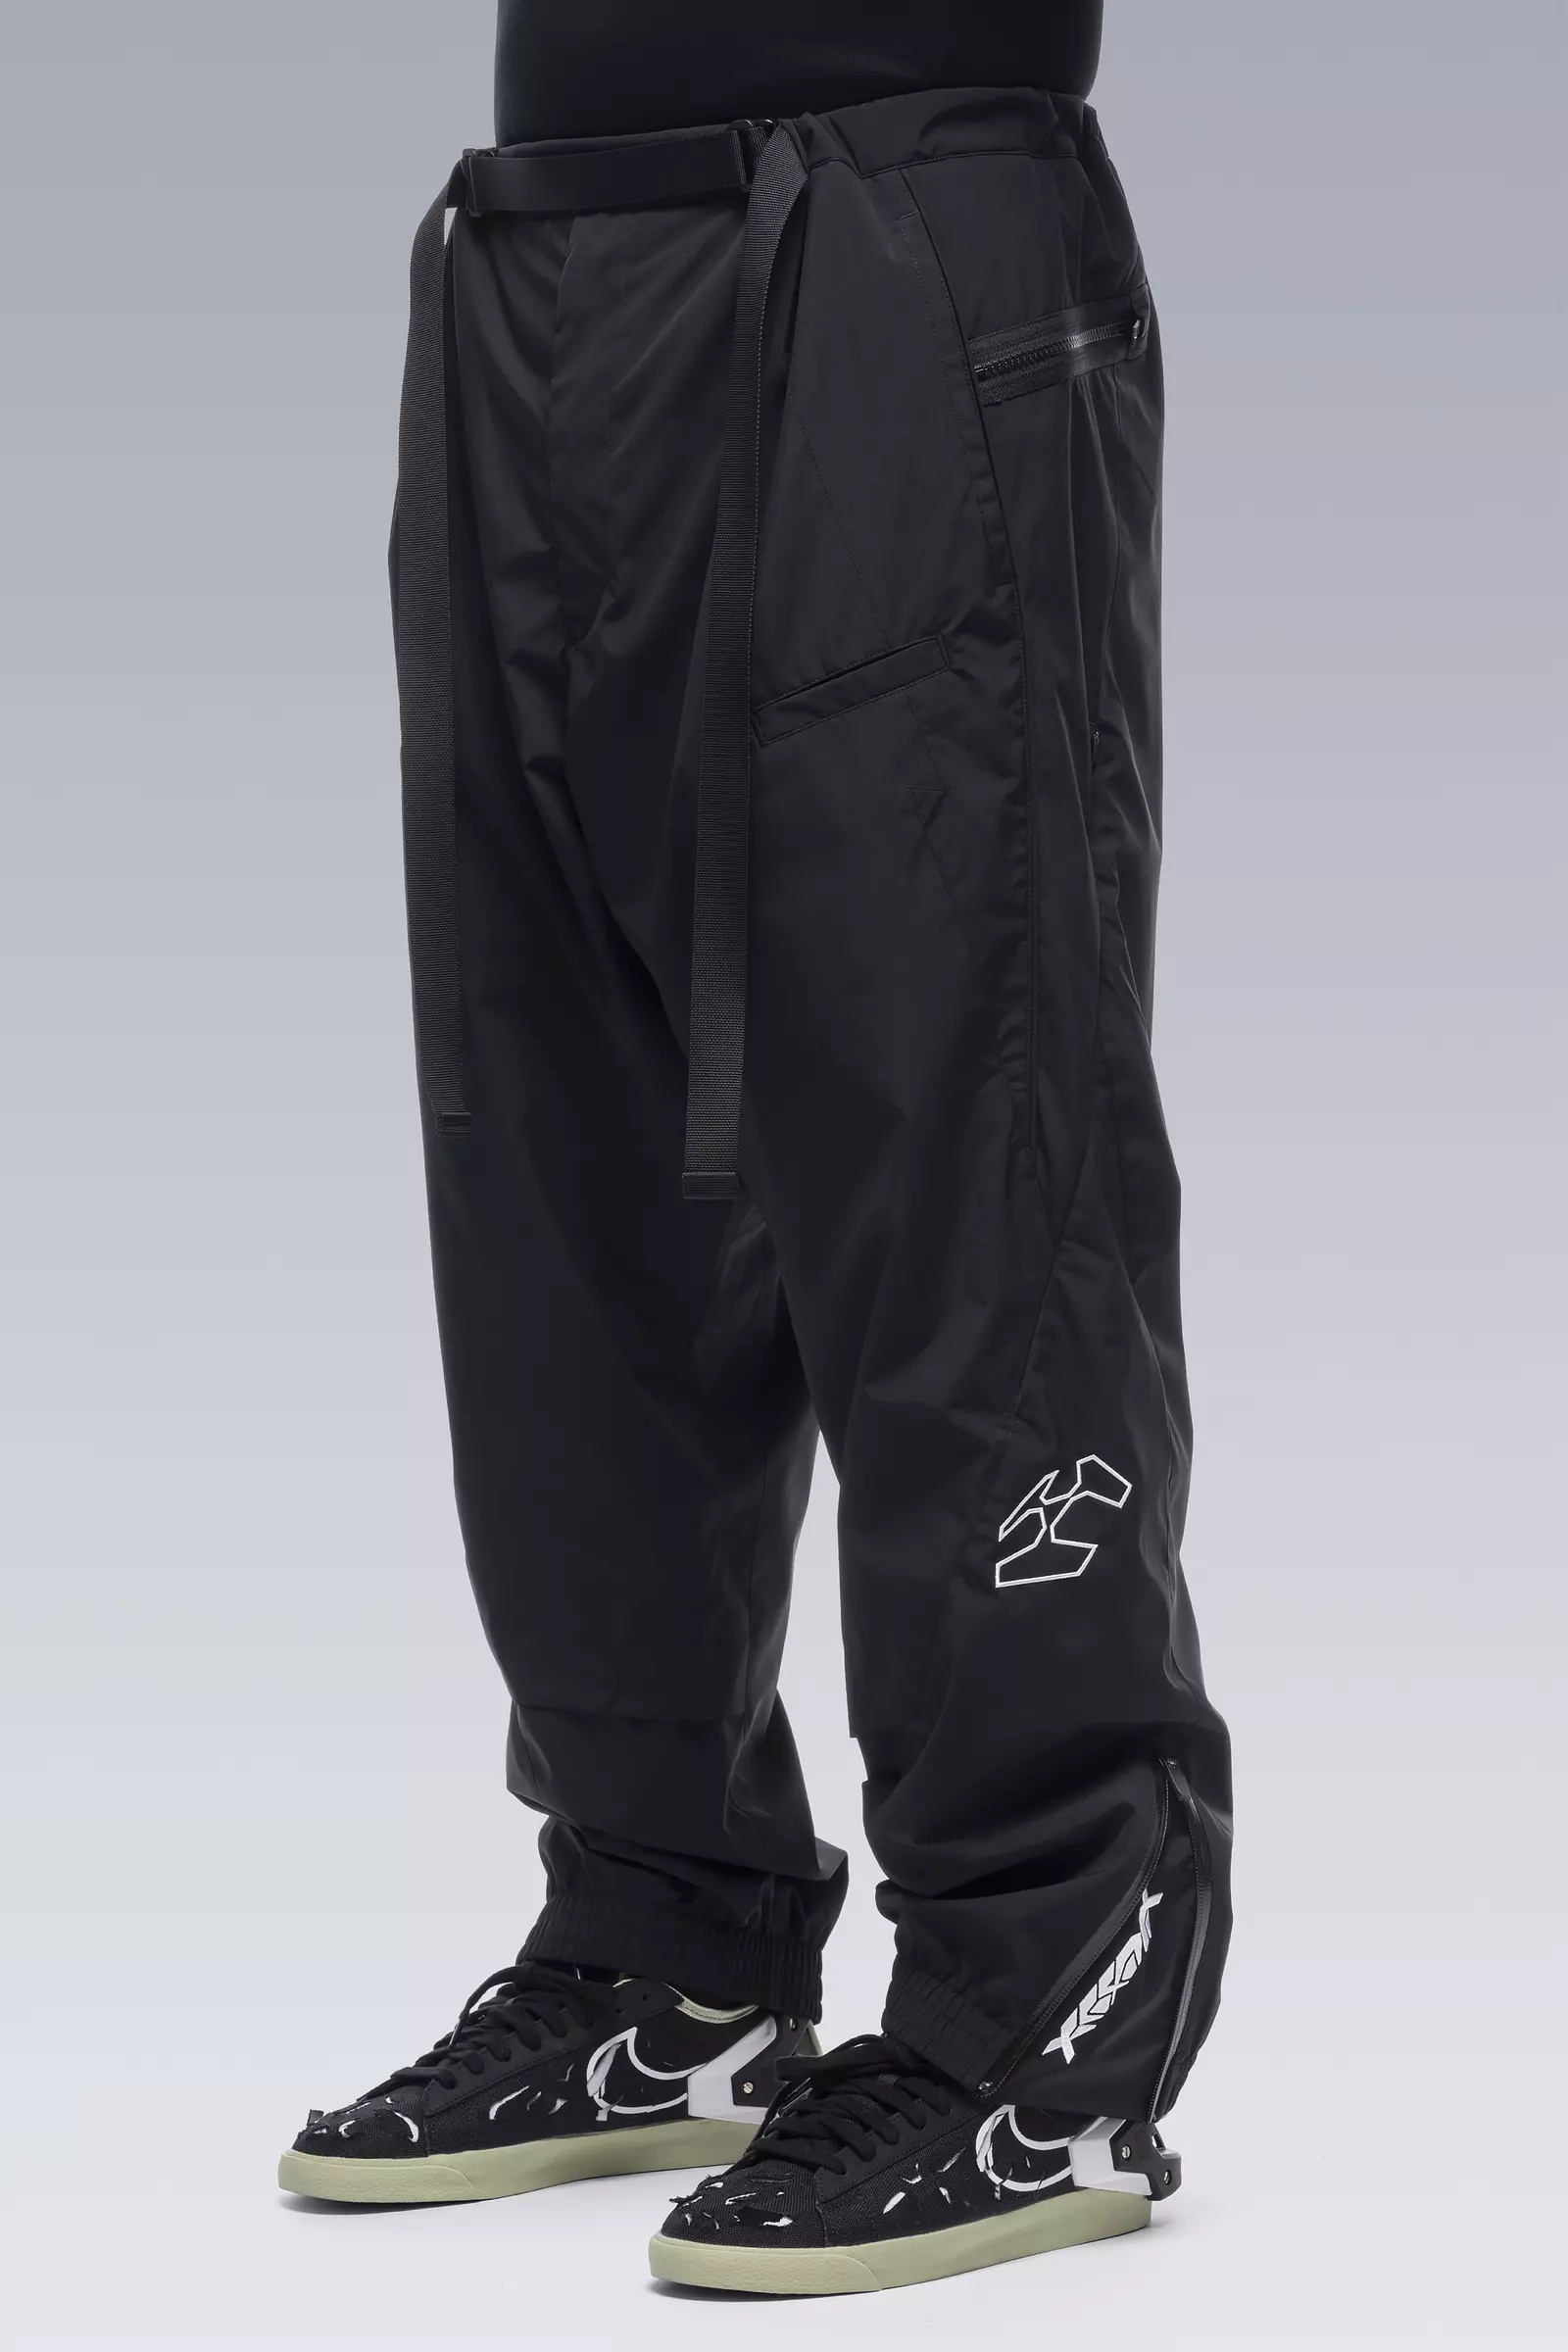 P53-WS 2L Gore-Tex® Windstopper® Insulated Vent Pants Black - 13